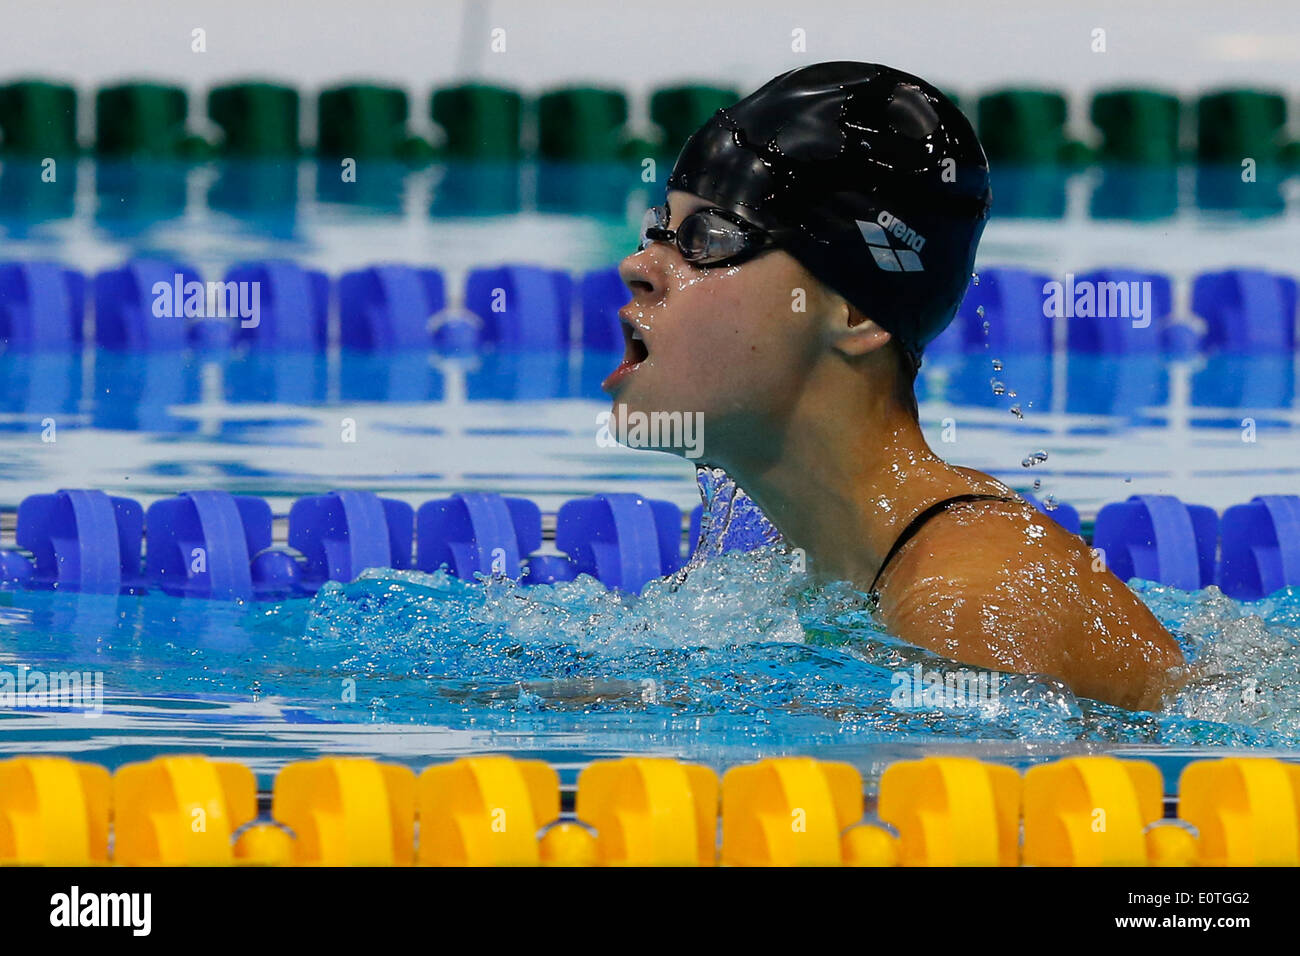 Viktoriia Savtsova of Ukraine on her way to win the gold during the women's 100m Backstroke - SB6 final swimming session competition held at the Aquatics Center during the London 2012 Paralympic Games in London, Britain, 05 September 2012. Stock Photo